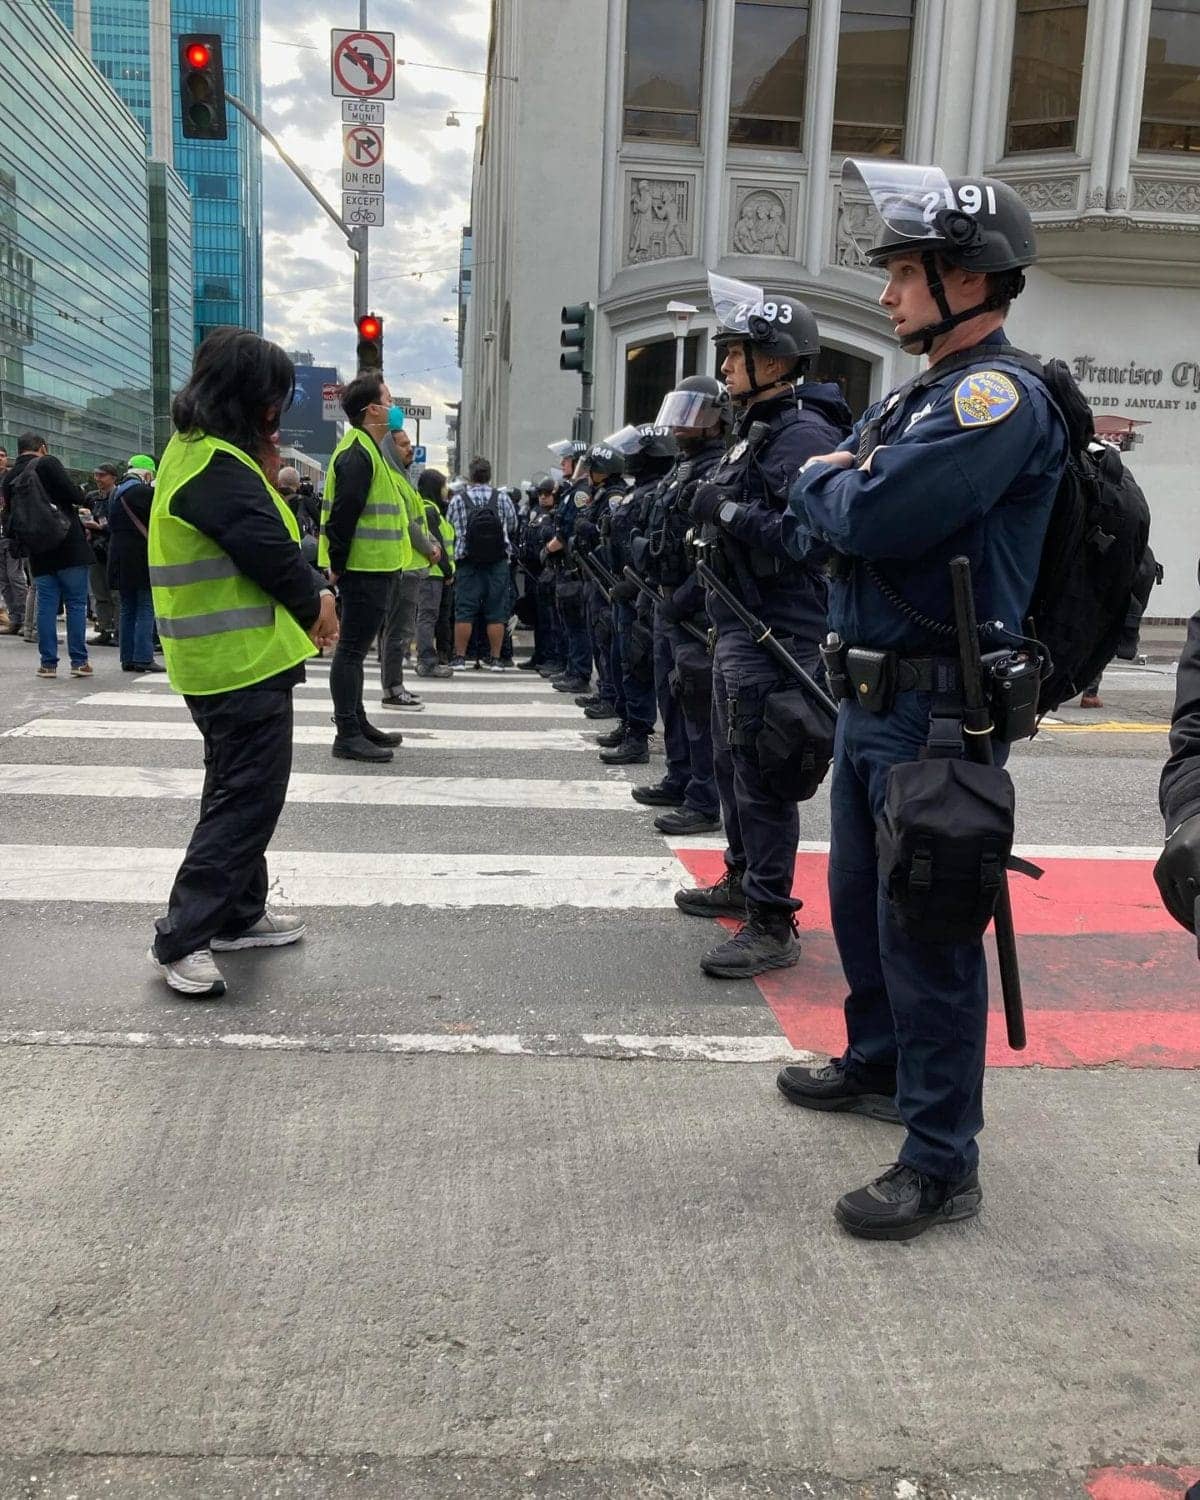 SFPD-squares-off-at-5th-Mission-for-APEC-111523-7am-by-Pearl-Ubungen-Ken-Miller-PNN, APEC faceoff: Homeless in Gaza, homeless in Huchuin, Featured Local News & Views 